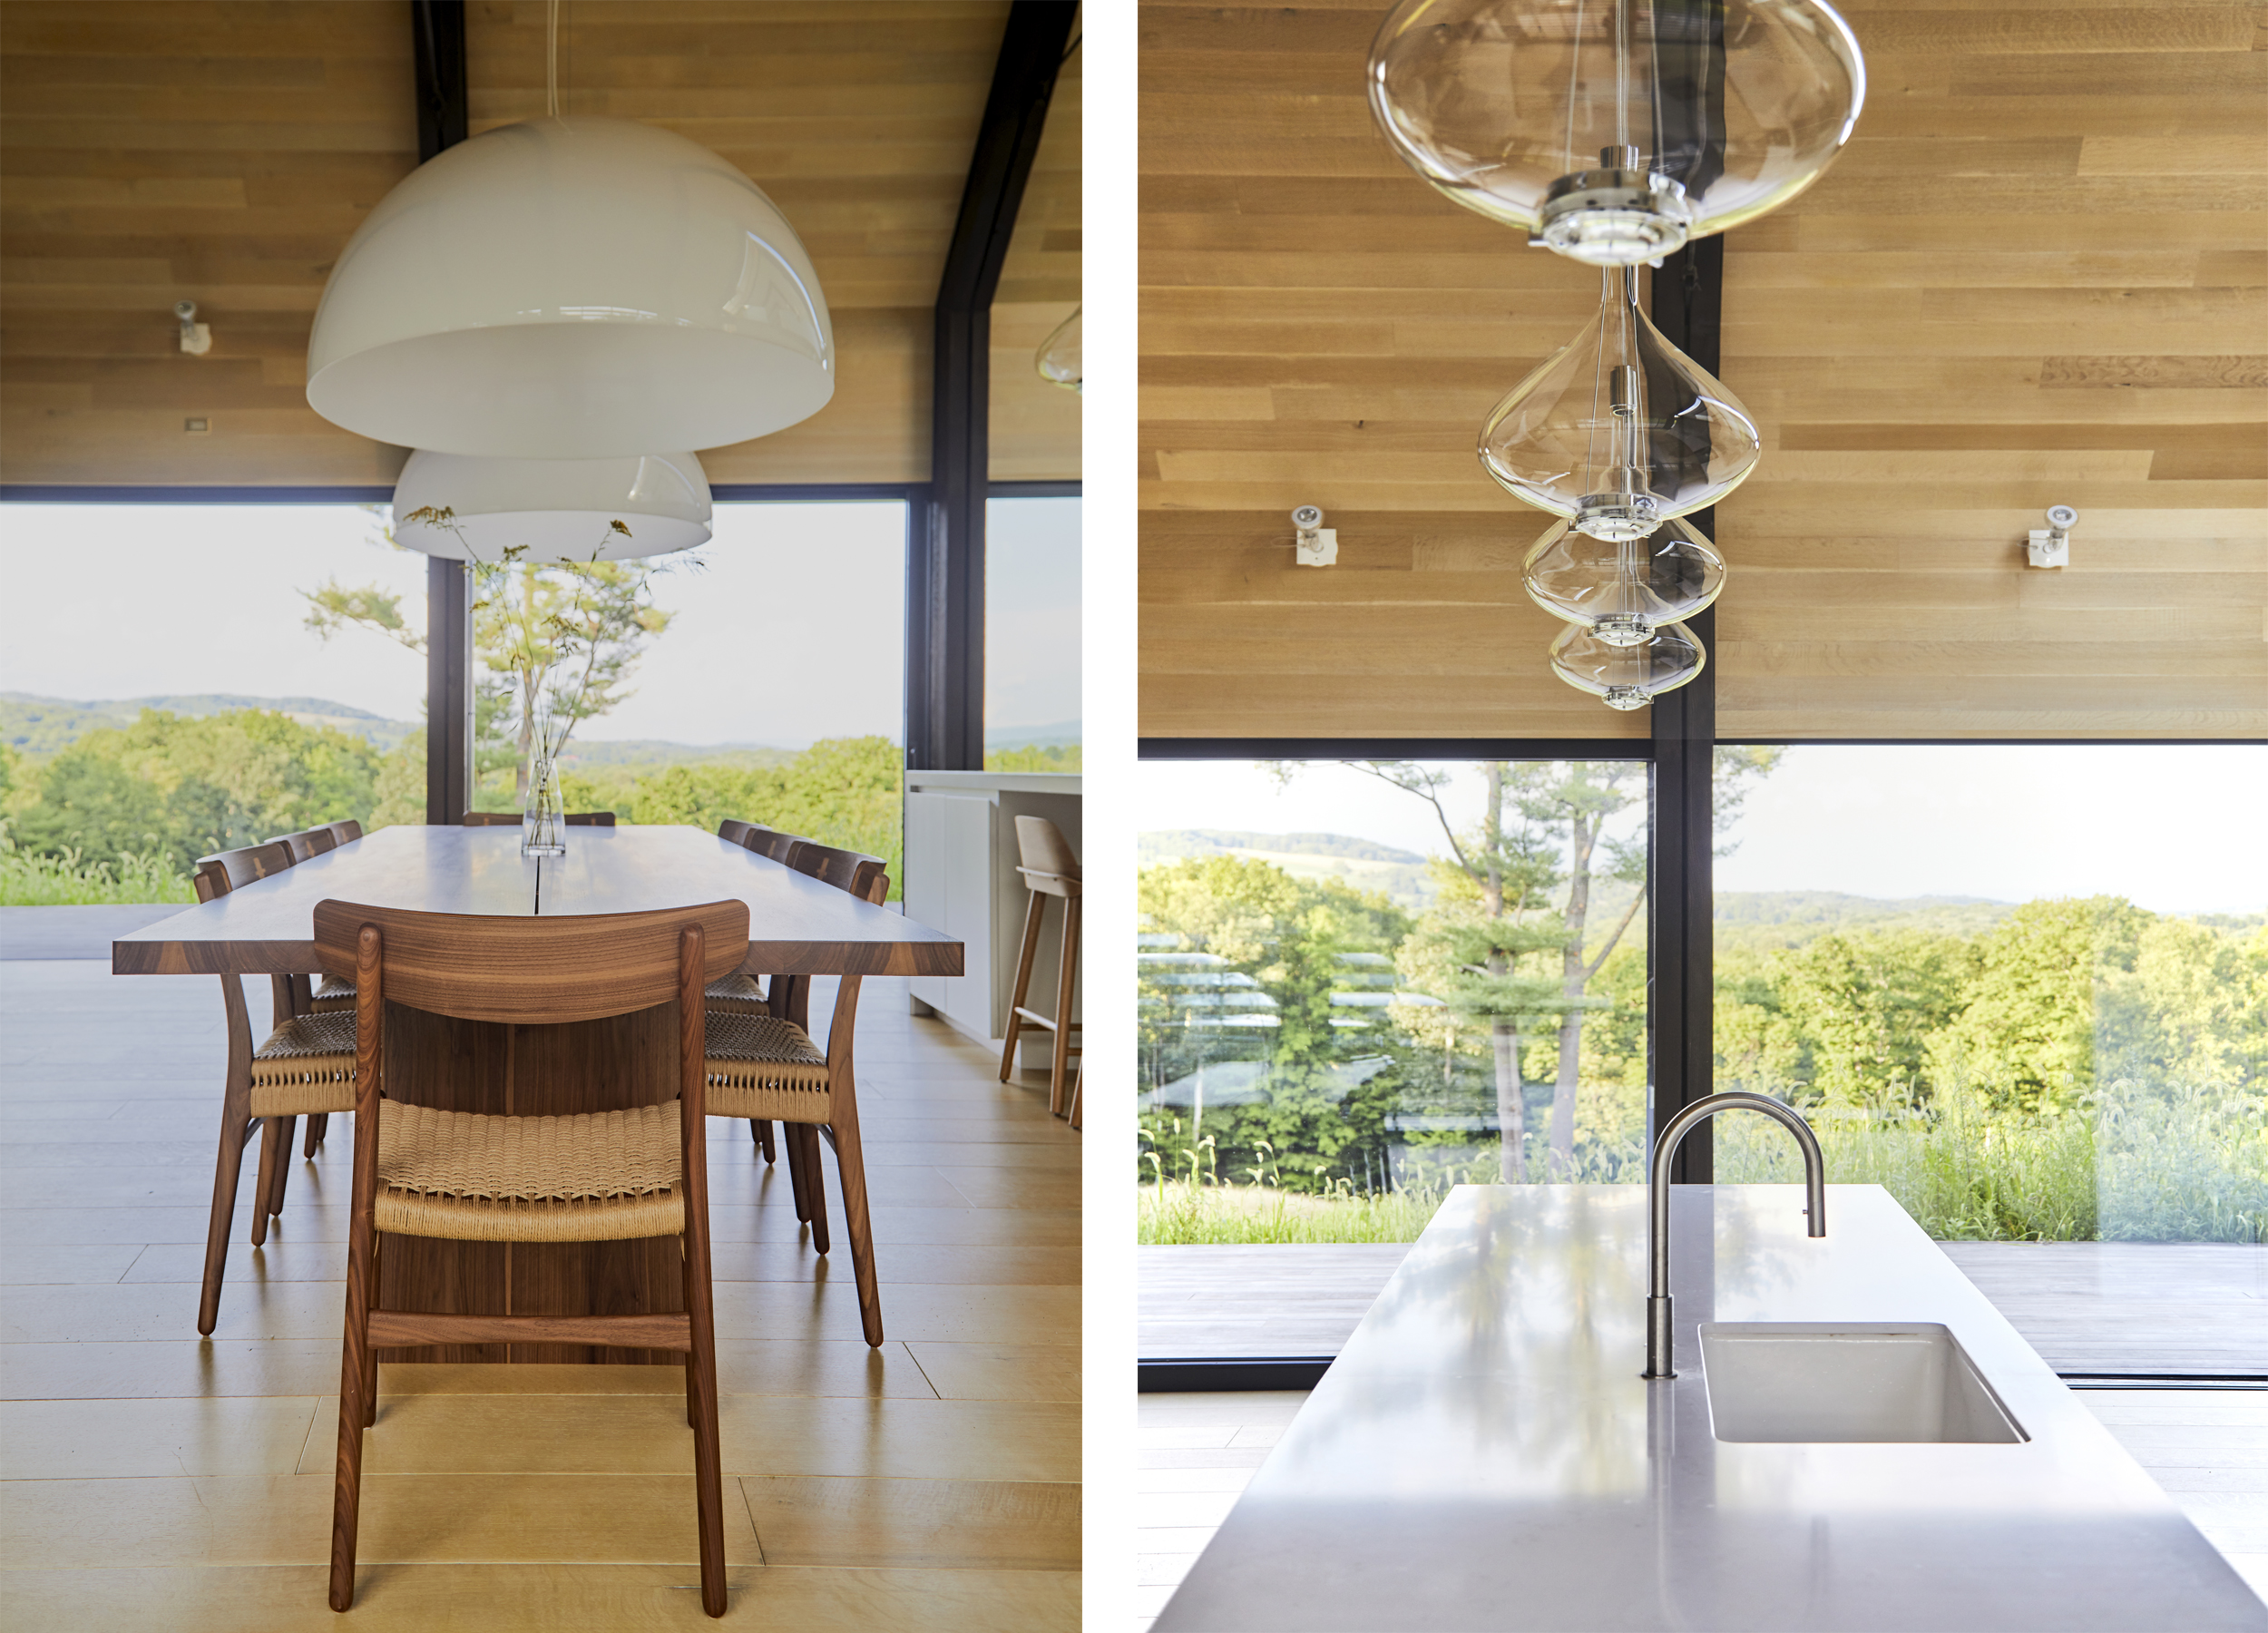 Pendants were carefully chosen and located in the large double-height living space to create functionally useful and beautiful symmetry lighting.